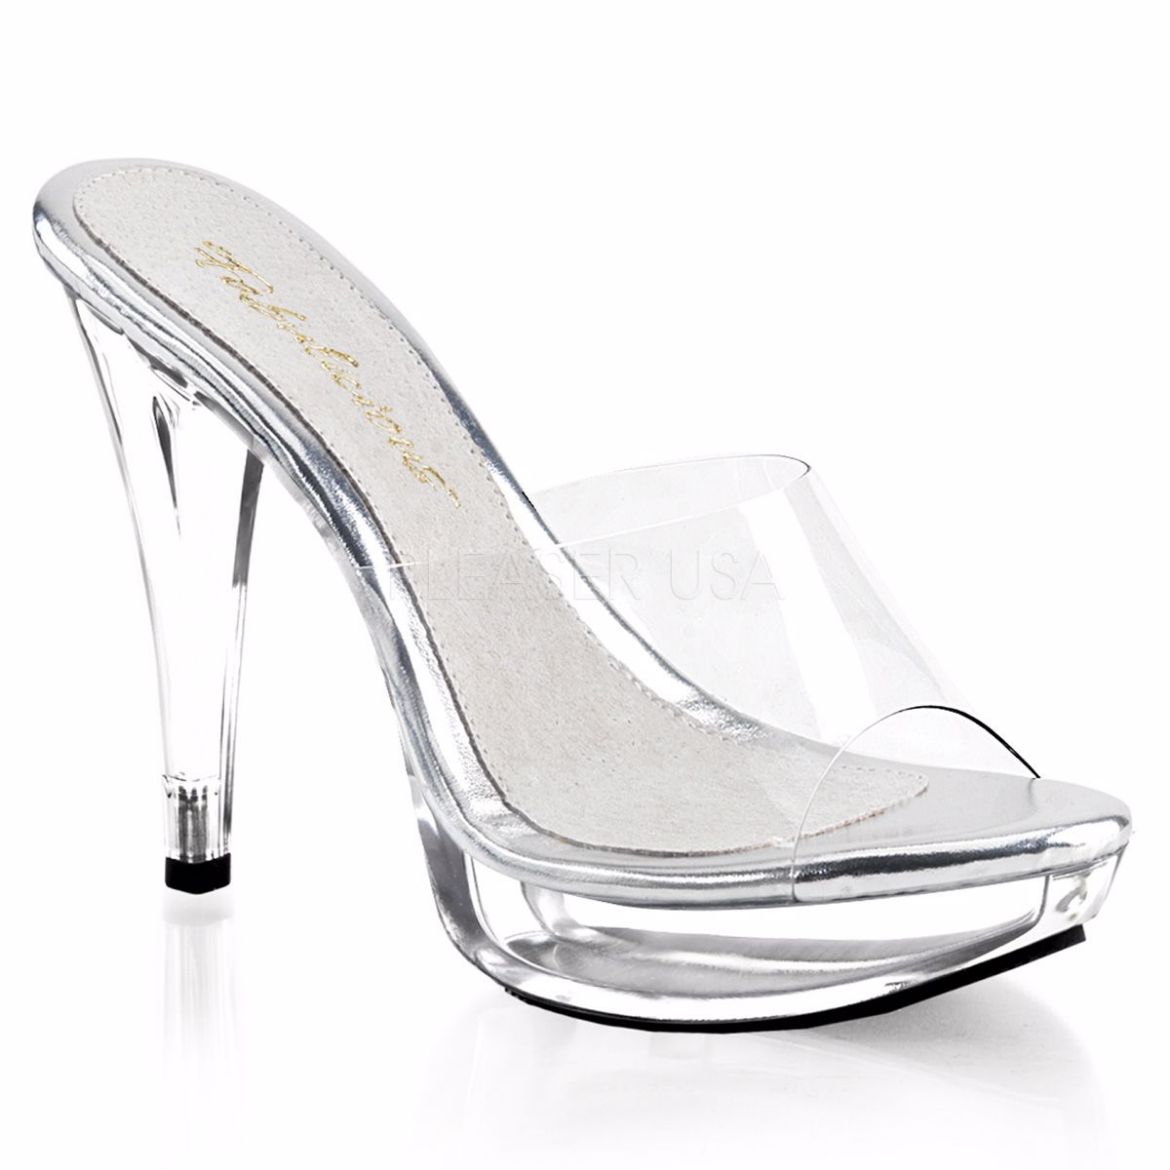 Product image of Fabulicious Cocktail-501 Clear/Clear, 5 inch (12.7 cm) Heel, 1 inch (2.5 cm) Platform Slide Mule Shoes